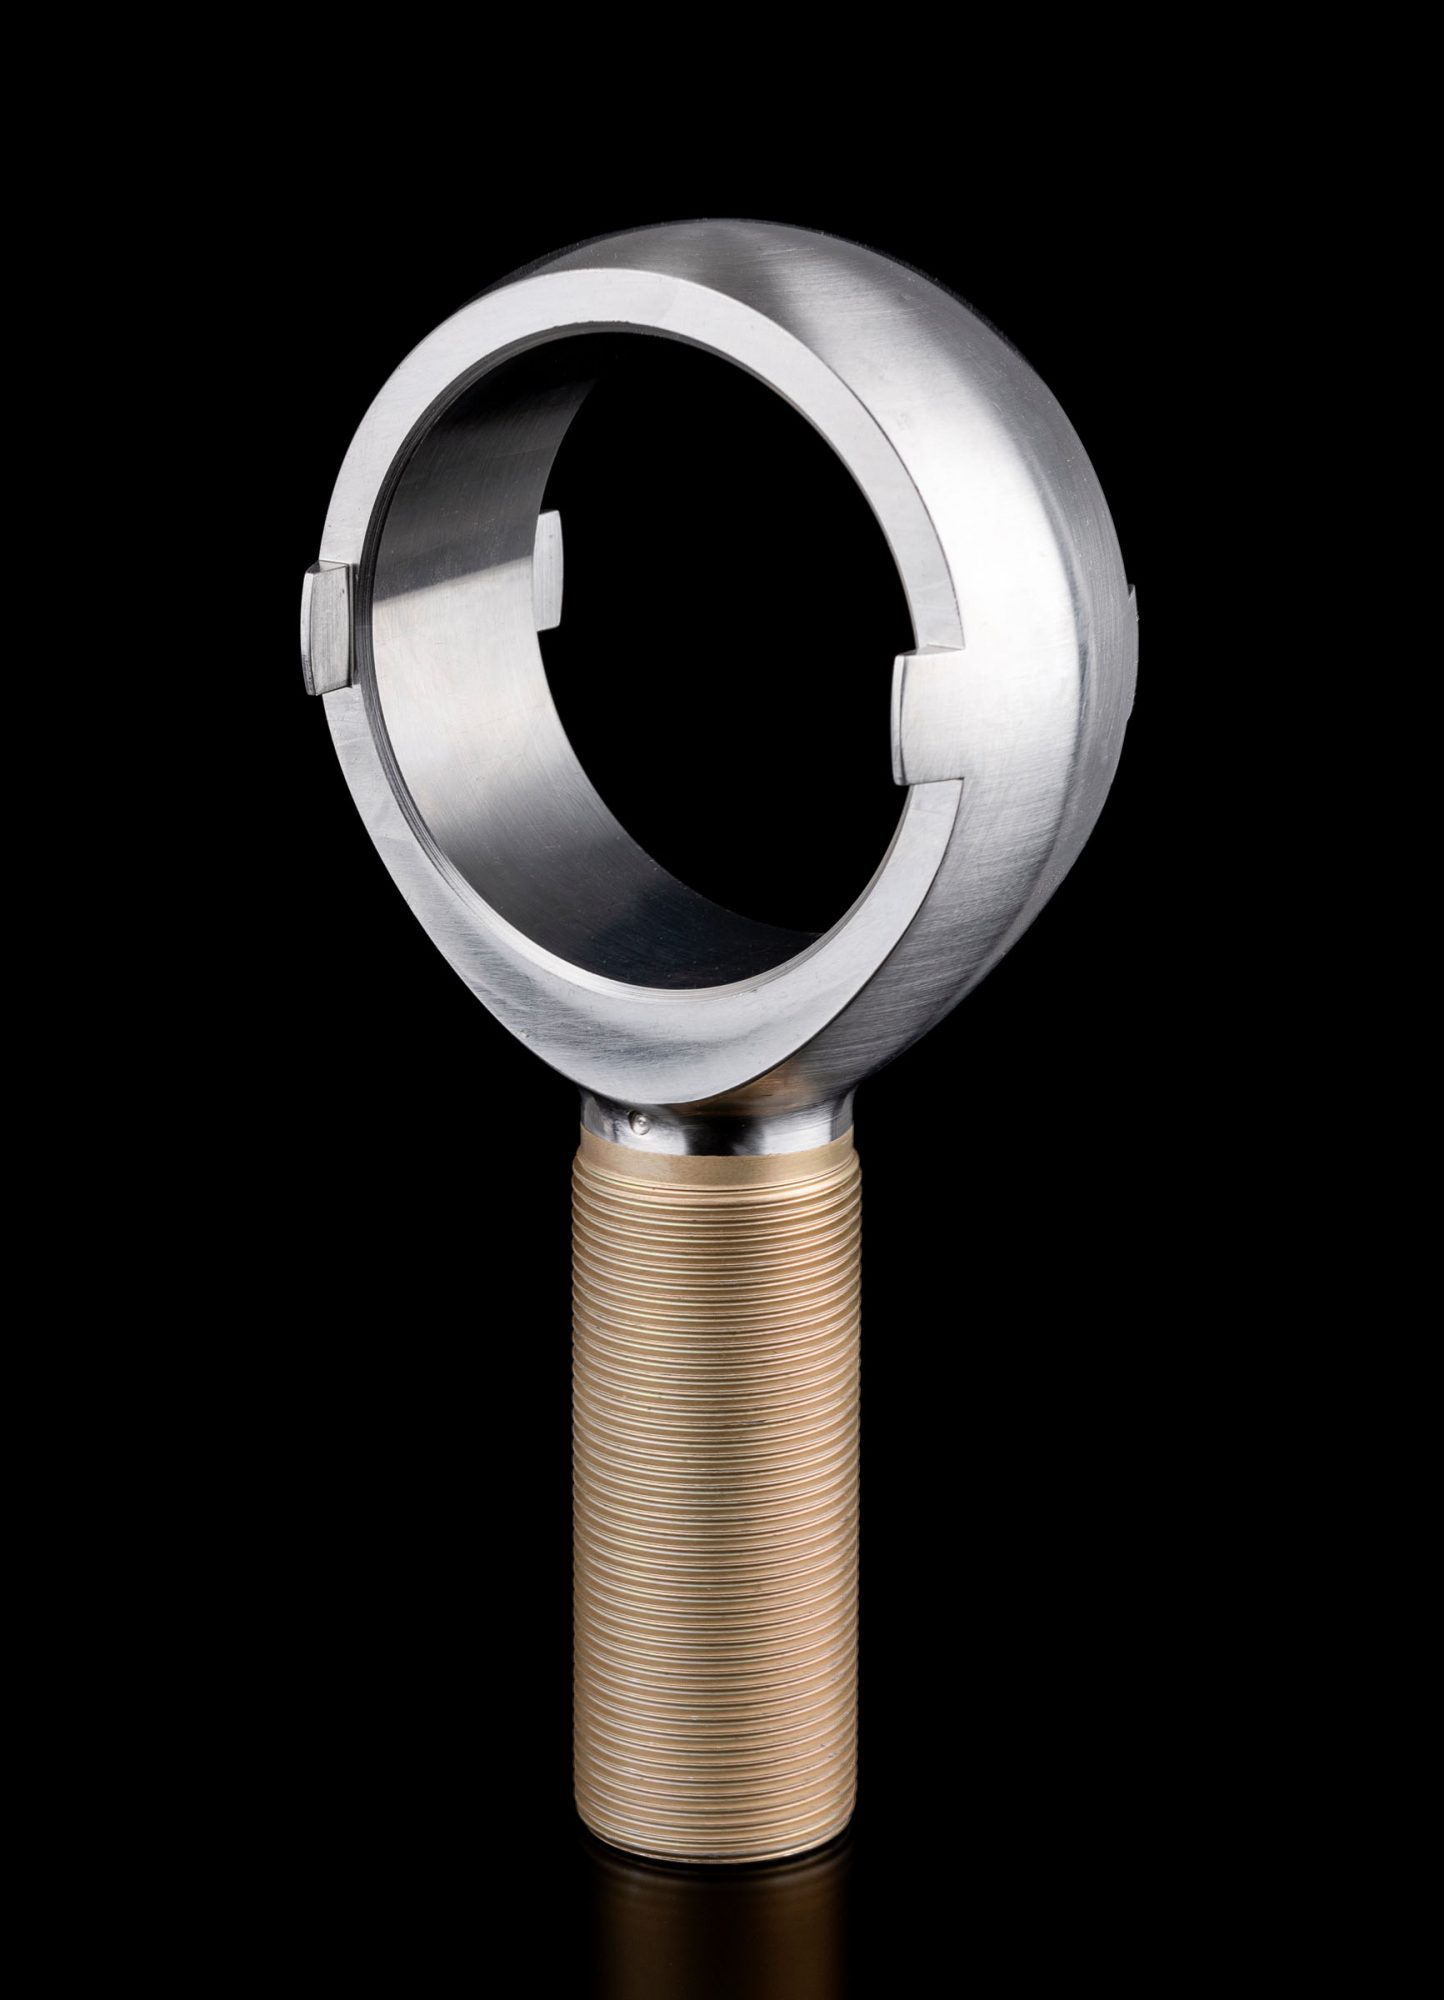 Cadmium-plated rod end for aerospace